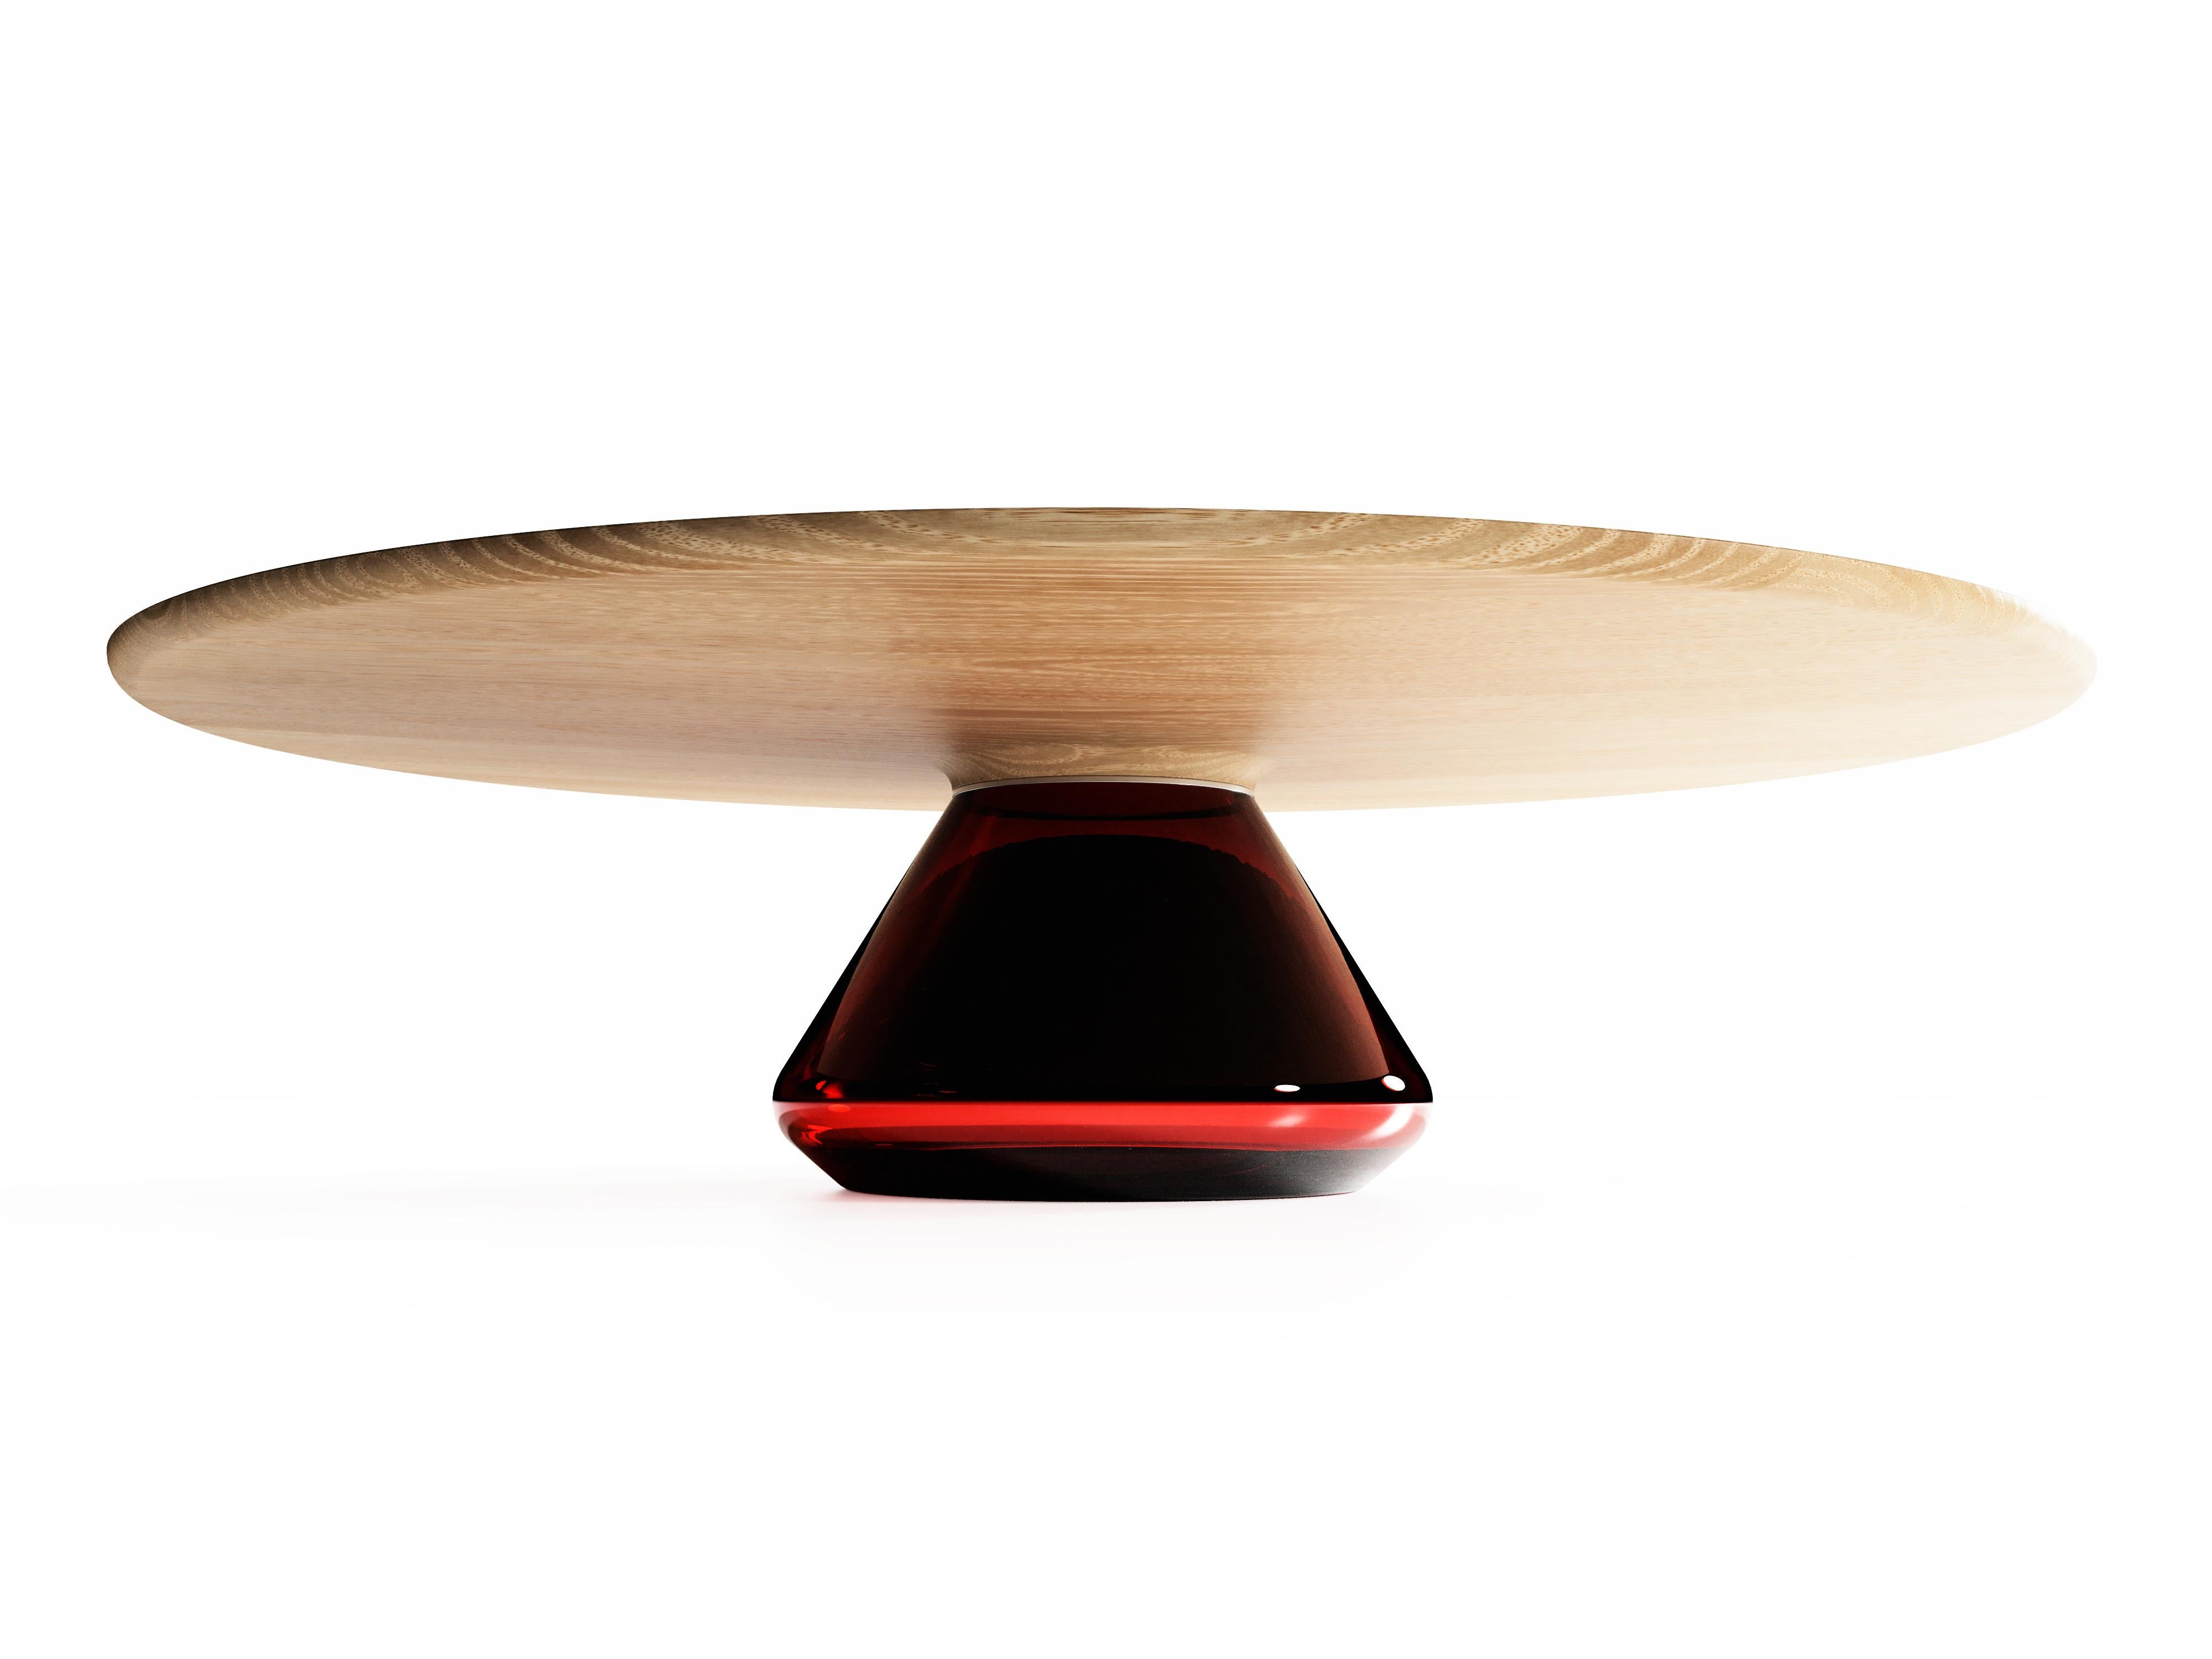 The Ruby Eclipse I, limited edition coffee table by Grzegorz Majka
Limited Edition of 8
Dimensions: 54 x 48 x 14 in
Materials: Glass, oak

The total eclipse of every interior? With this amazing table everything is possible as with its Minimalist